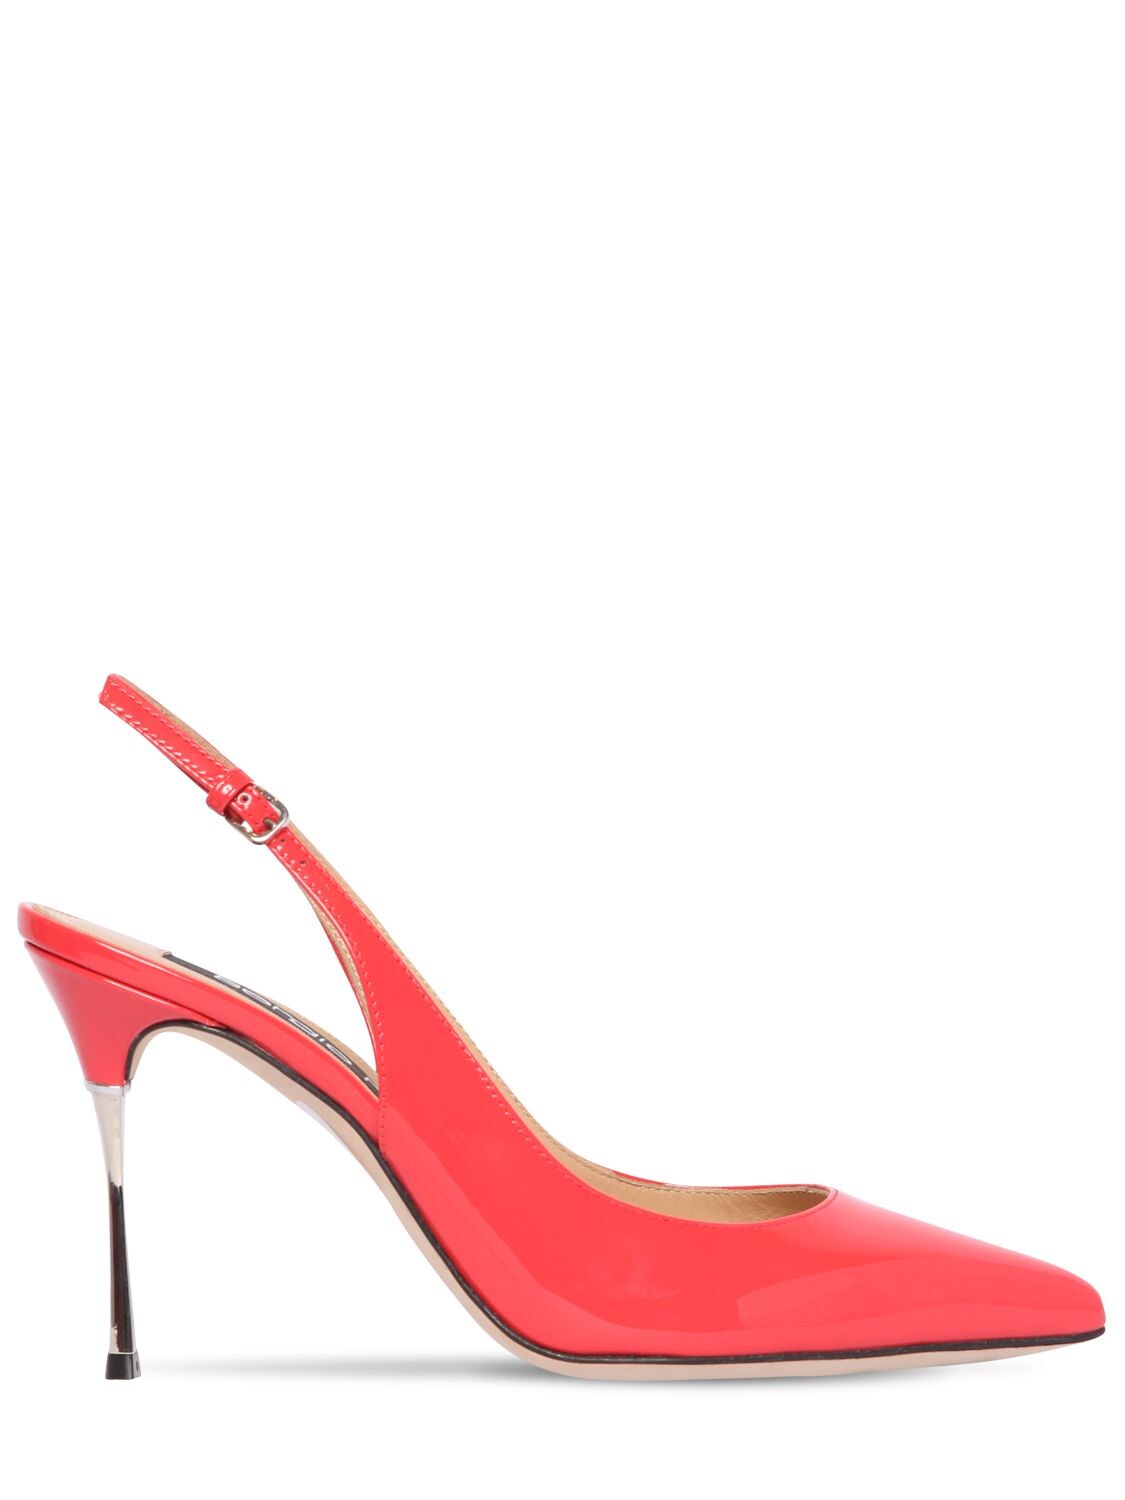 Sergio Rossi 90mm Patent Leather Sling Back Pumps In Coral